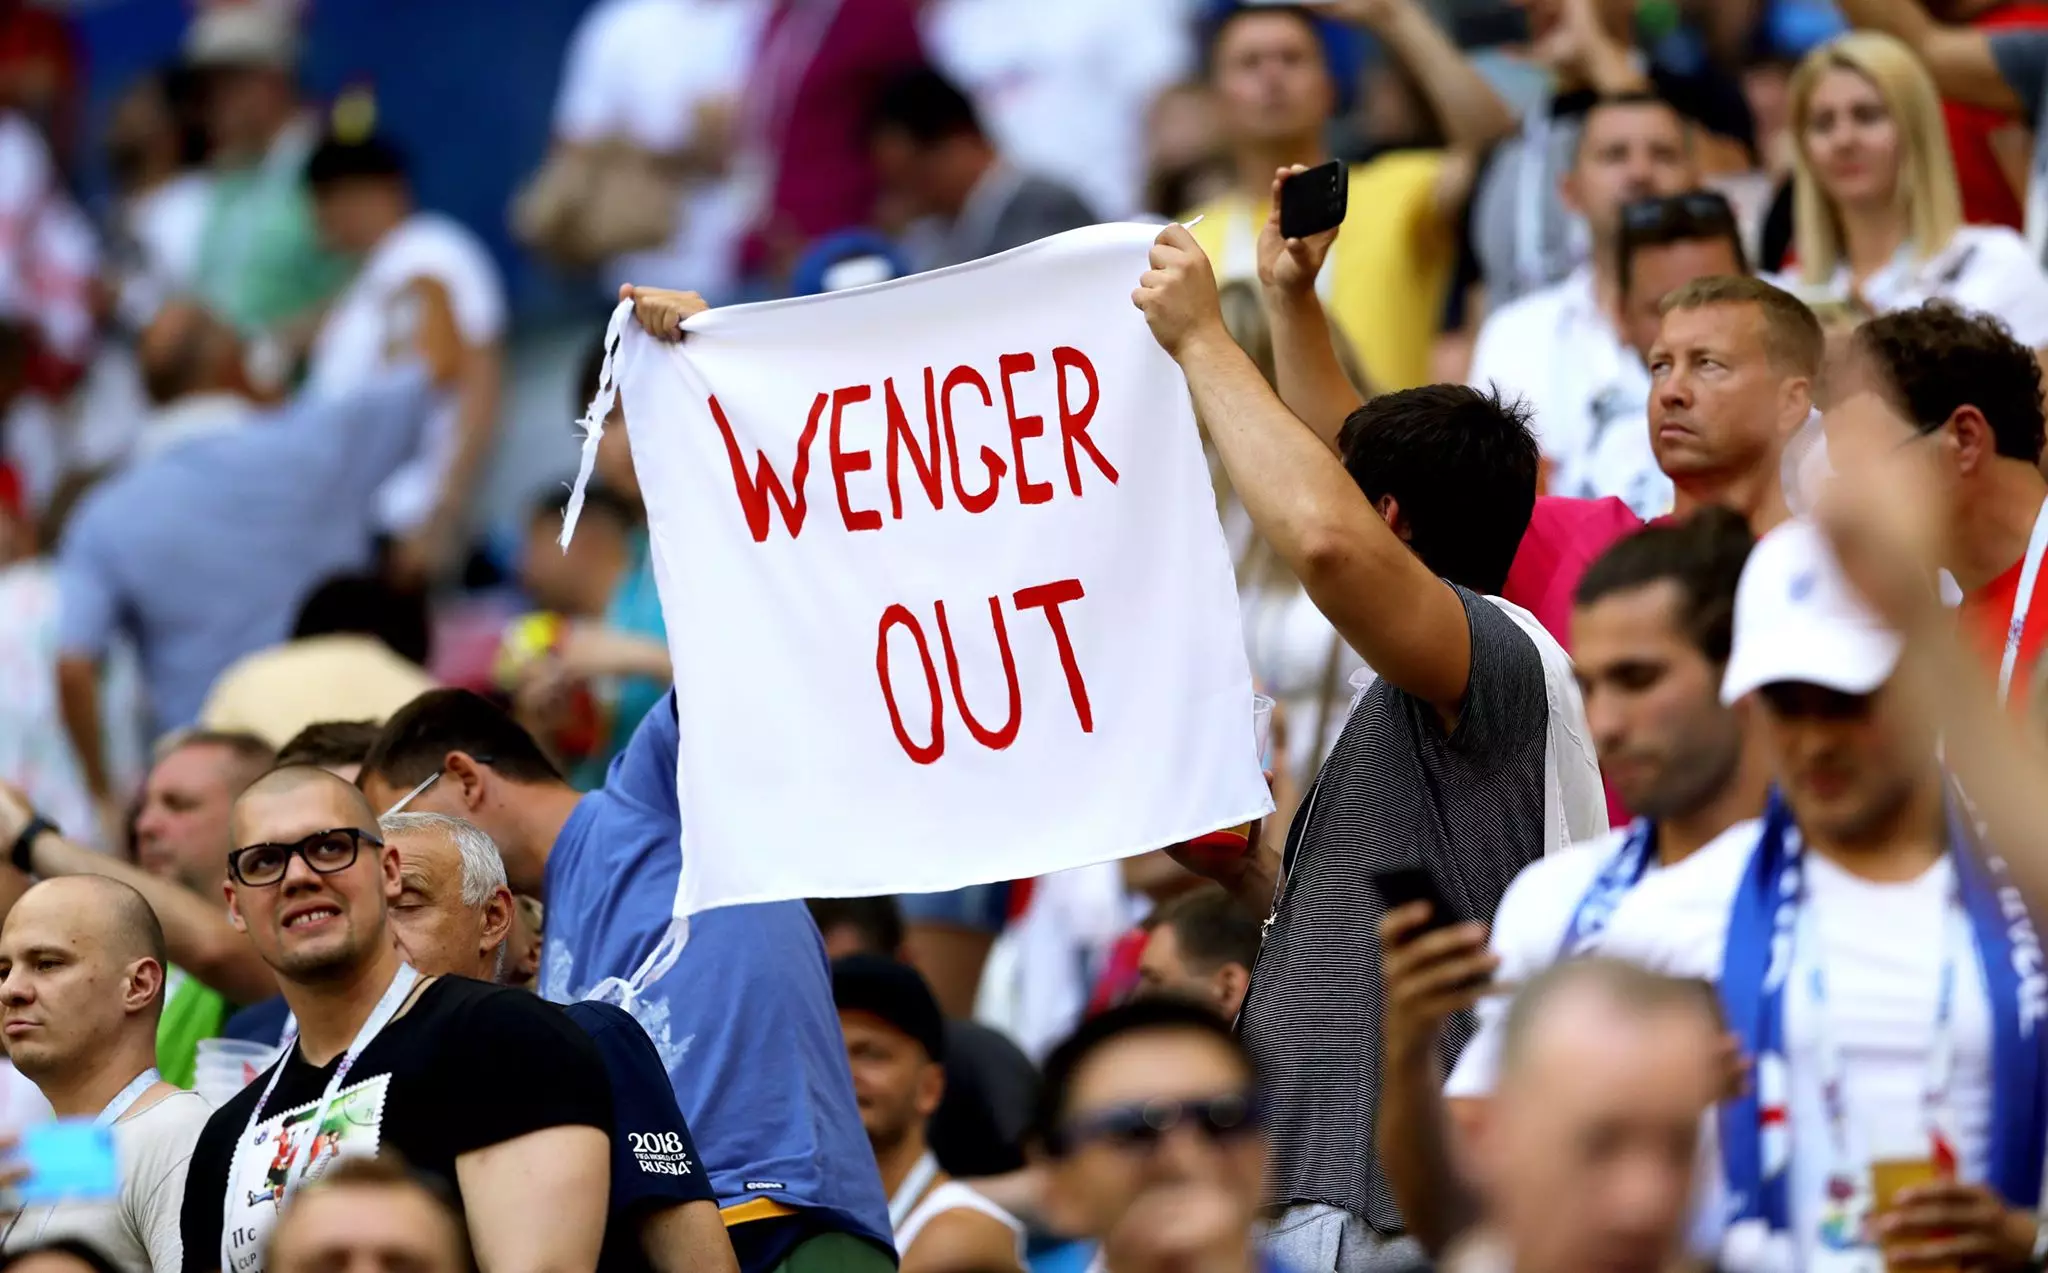 Wenger Out in Russia. Image: PA Images